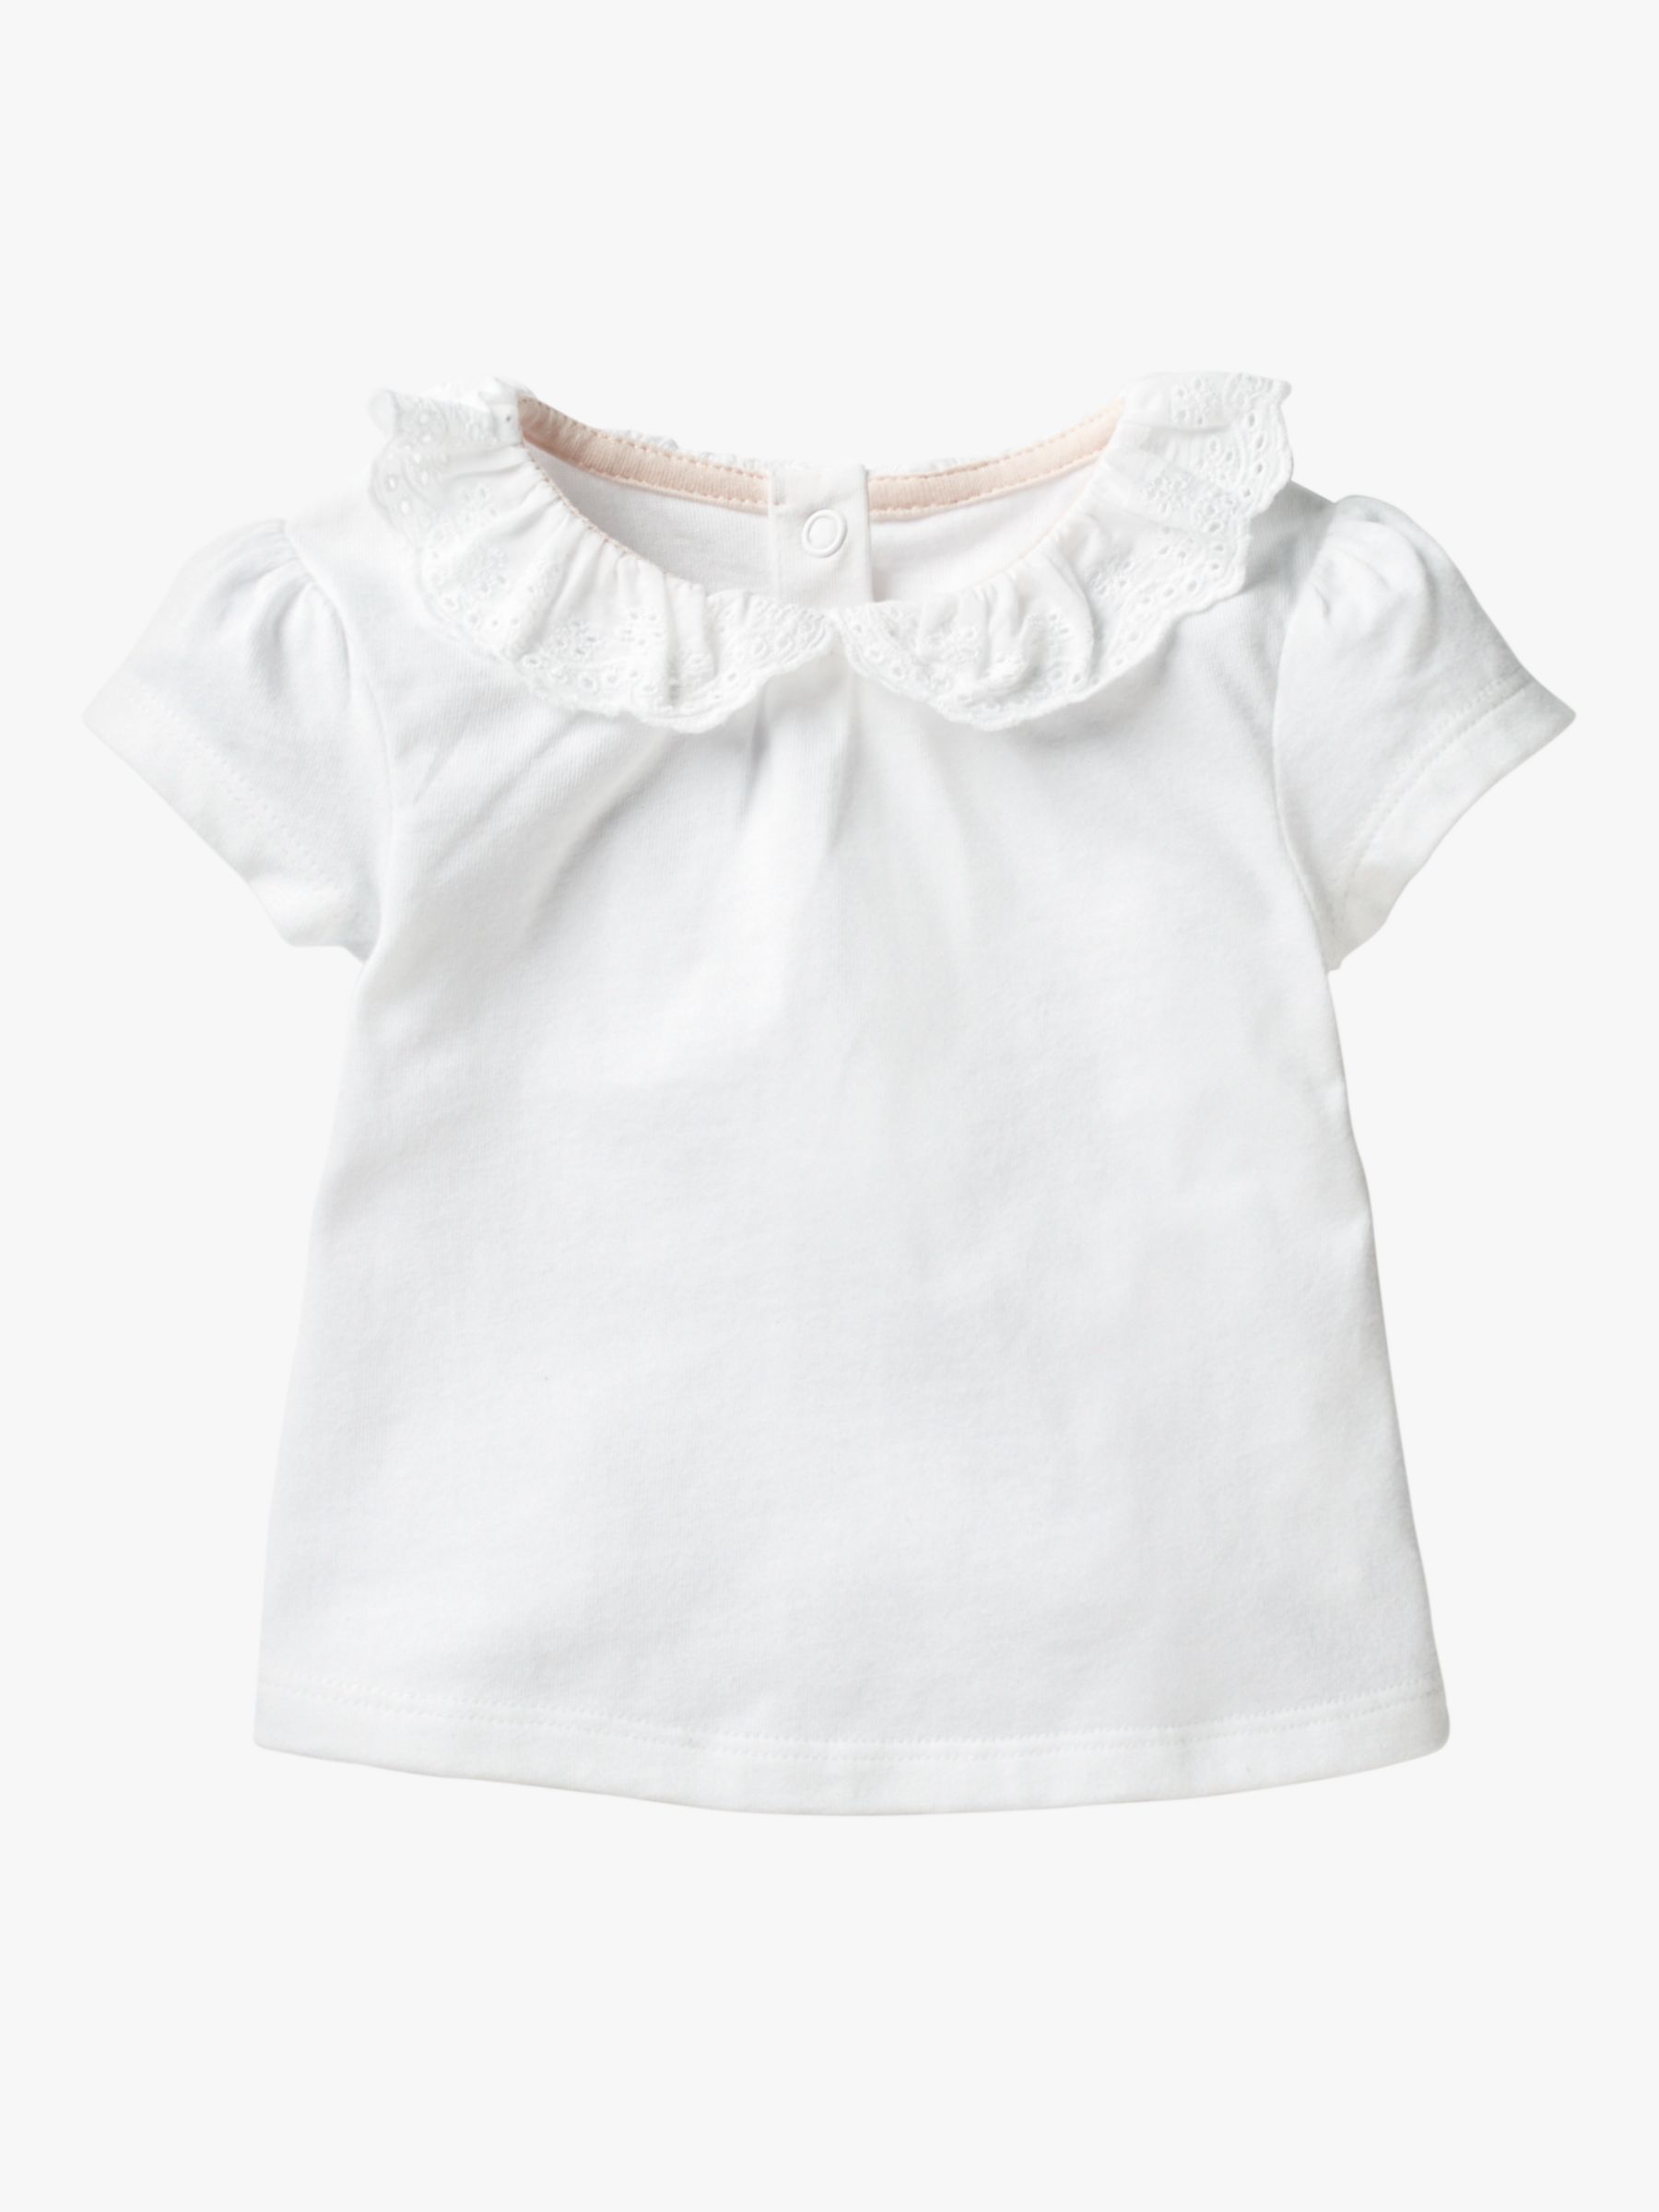 Baby Girl Clothes | Baby Girl Outfits | John Lewis & Partners